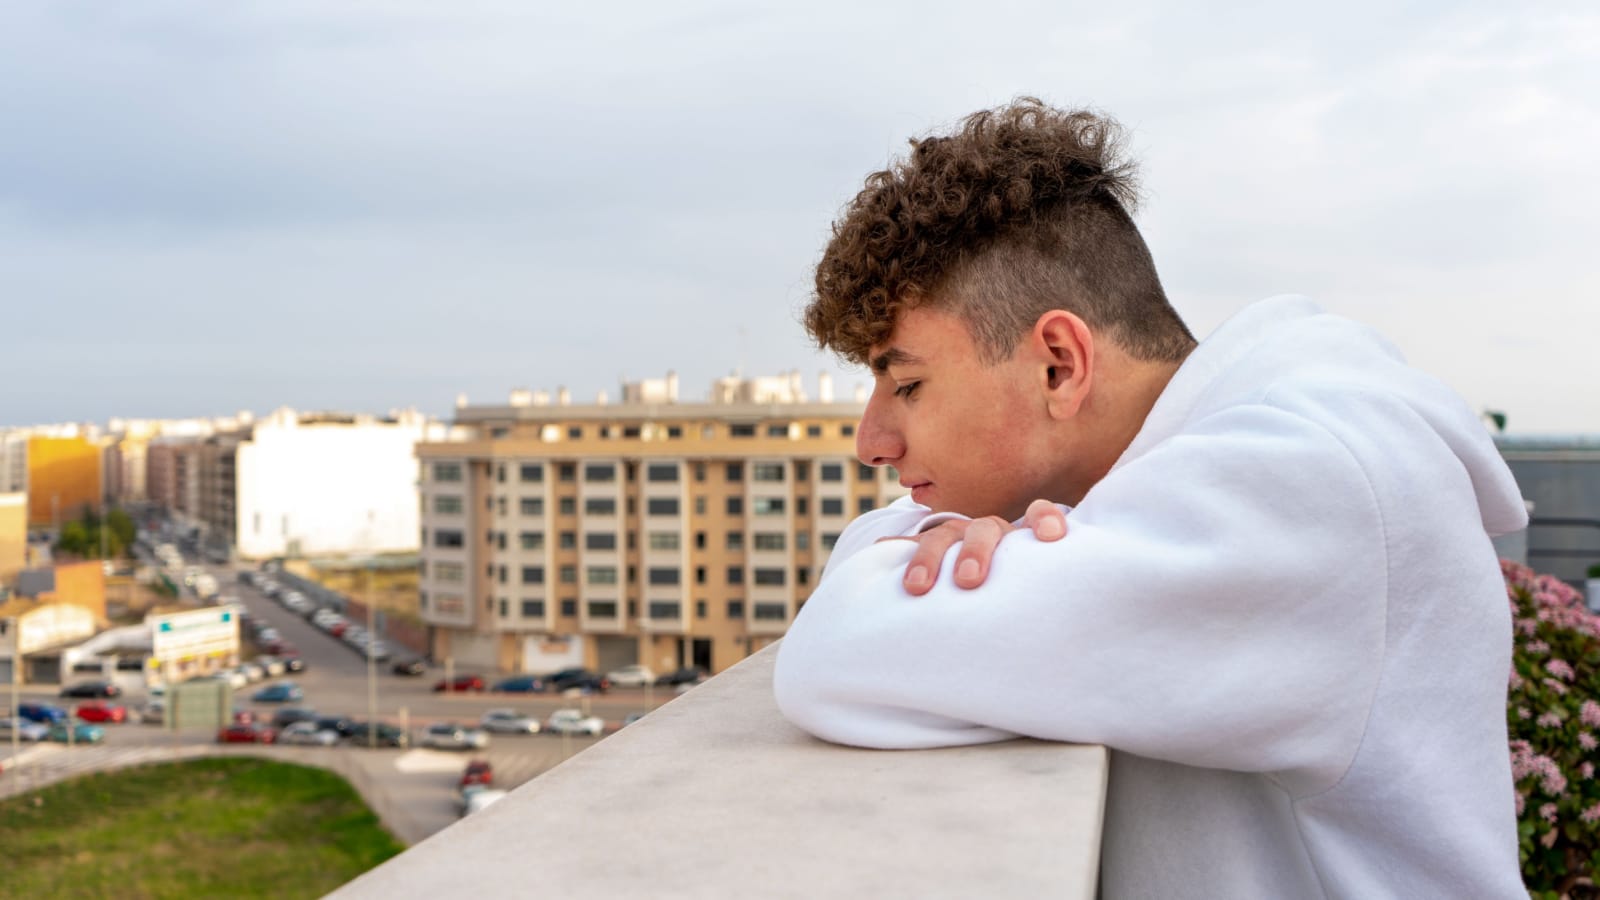 Young Caucasian man with curly hair dressed in a white sweatshirt looking at the city skyline serious and melancholic, I think about his future and what life has prepared for him broccoli hair